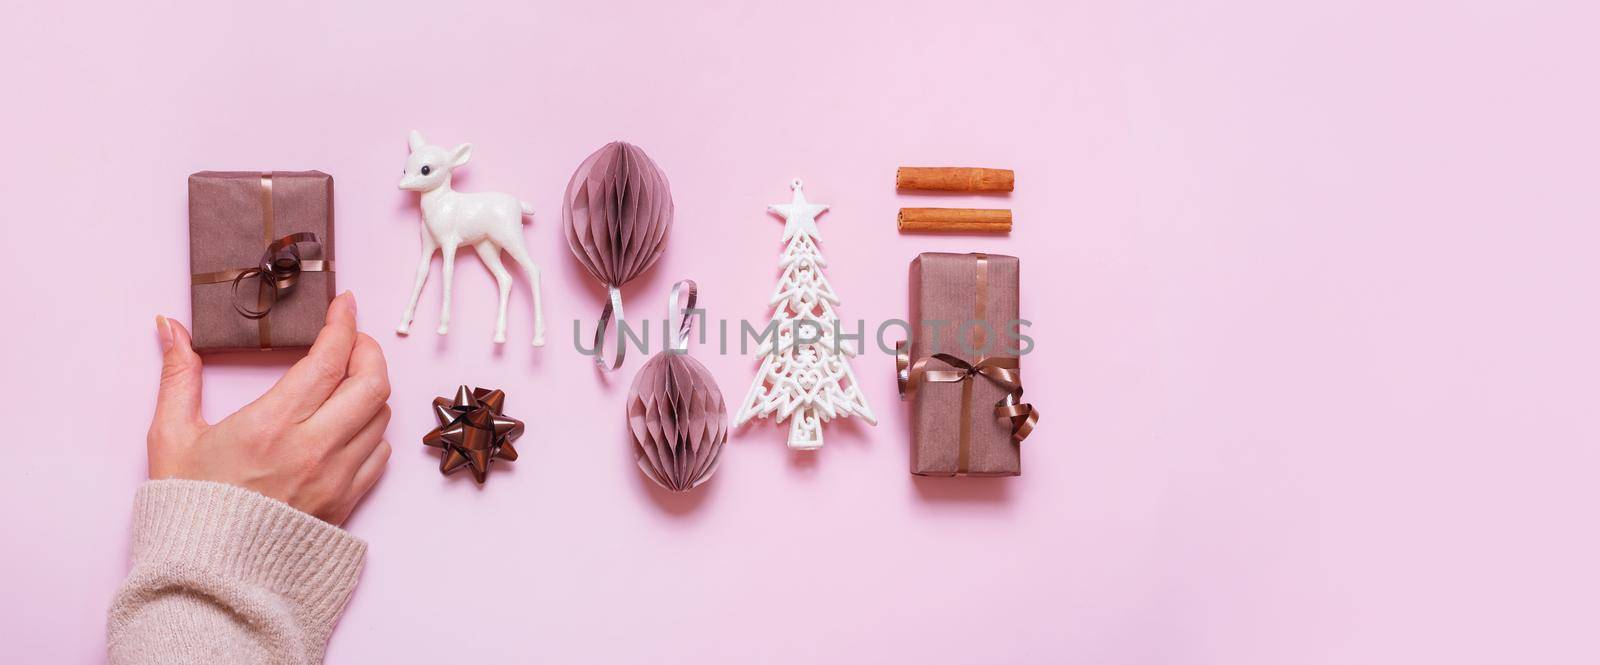 Festive minimal creative christmas composition with gifts, paper balls and xmas tree flat lay on pink background by ssvimaliss